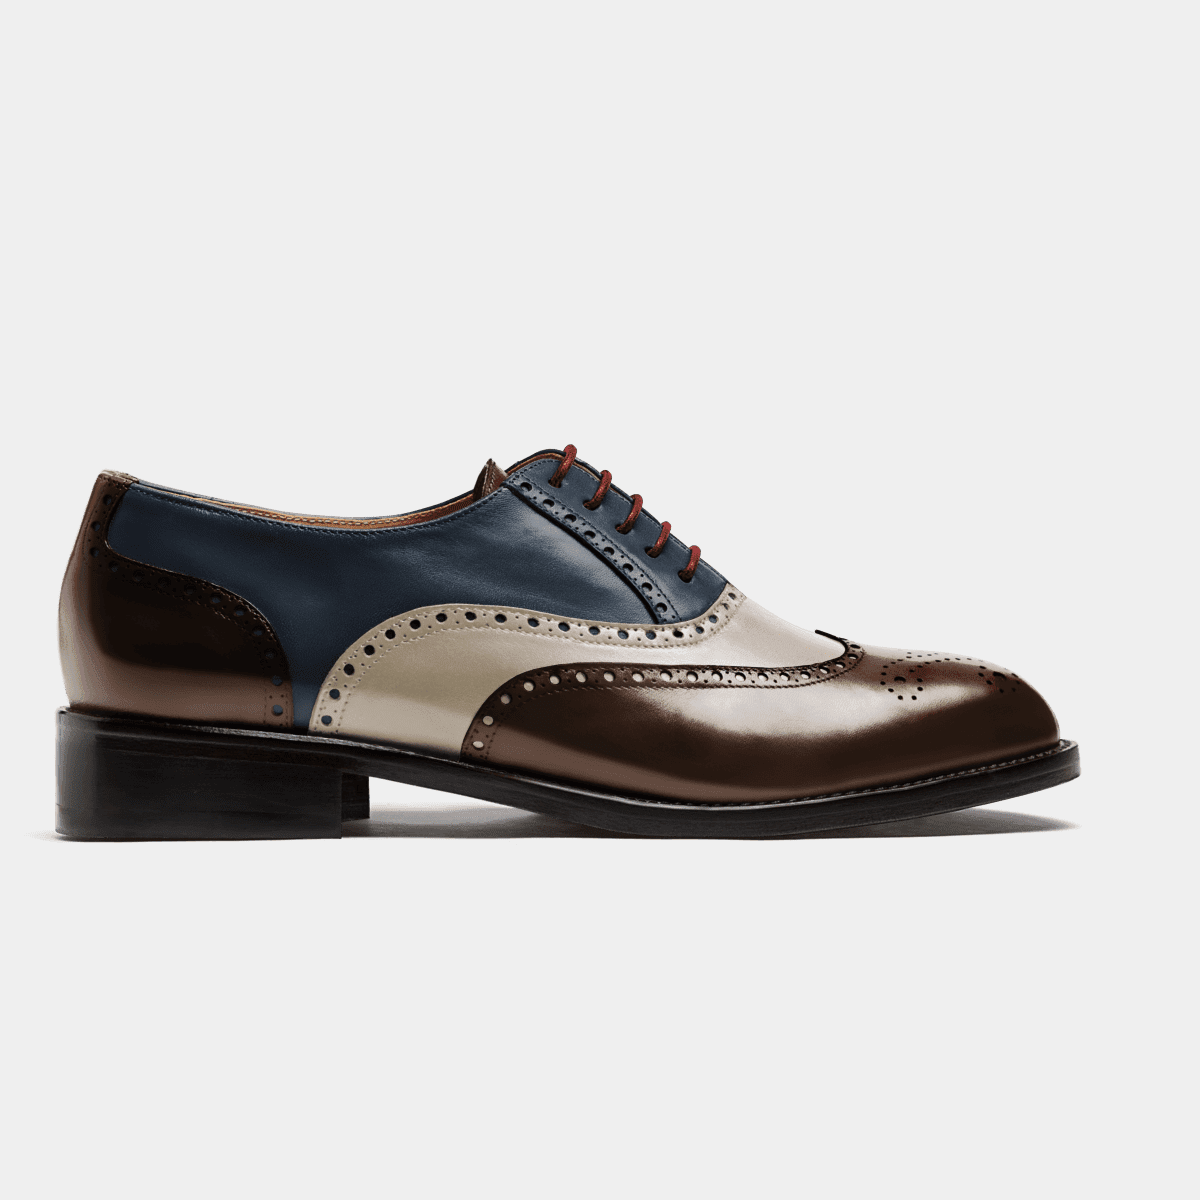 Full Brogue shoes - brown, white & blue flora leather & leather $235 ...